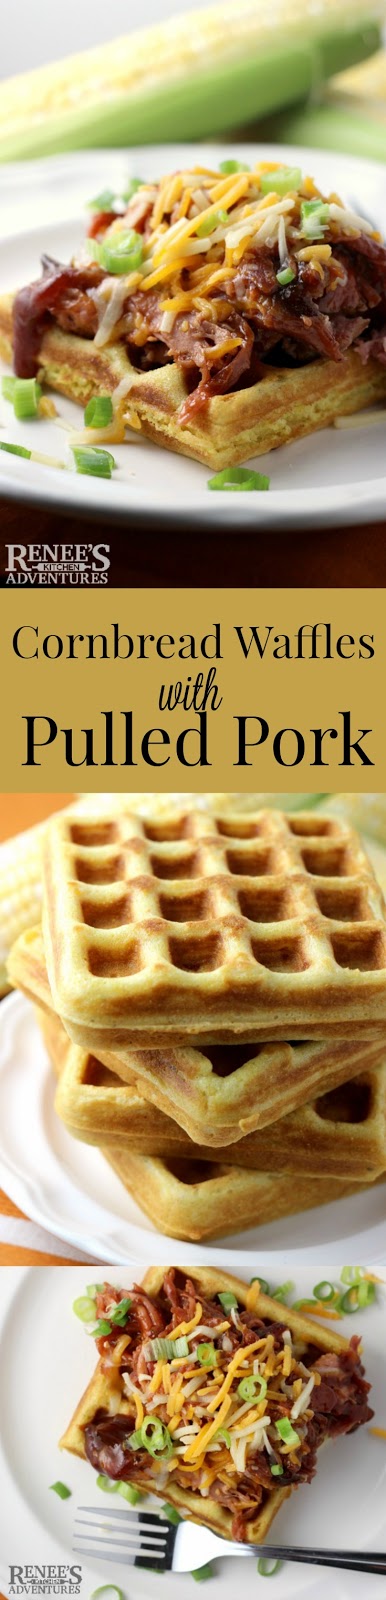 Cornbread Waffles with Pulled Pork | by Renee's Kitchen Adventures is an easy recipe for cornbread waffles topped with store-bought pulled pork for a fun and easy dinner idea!  #SundaySupper